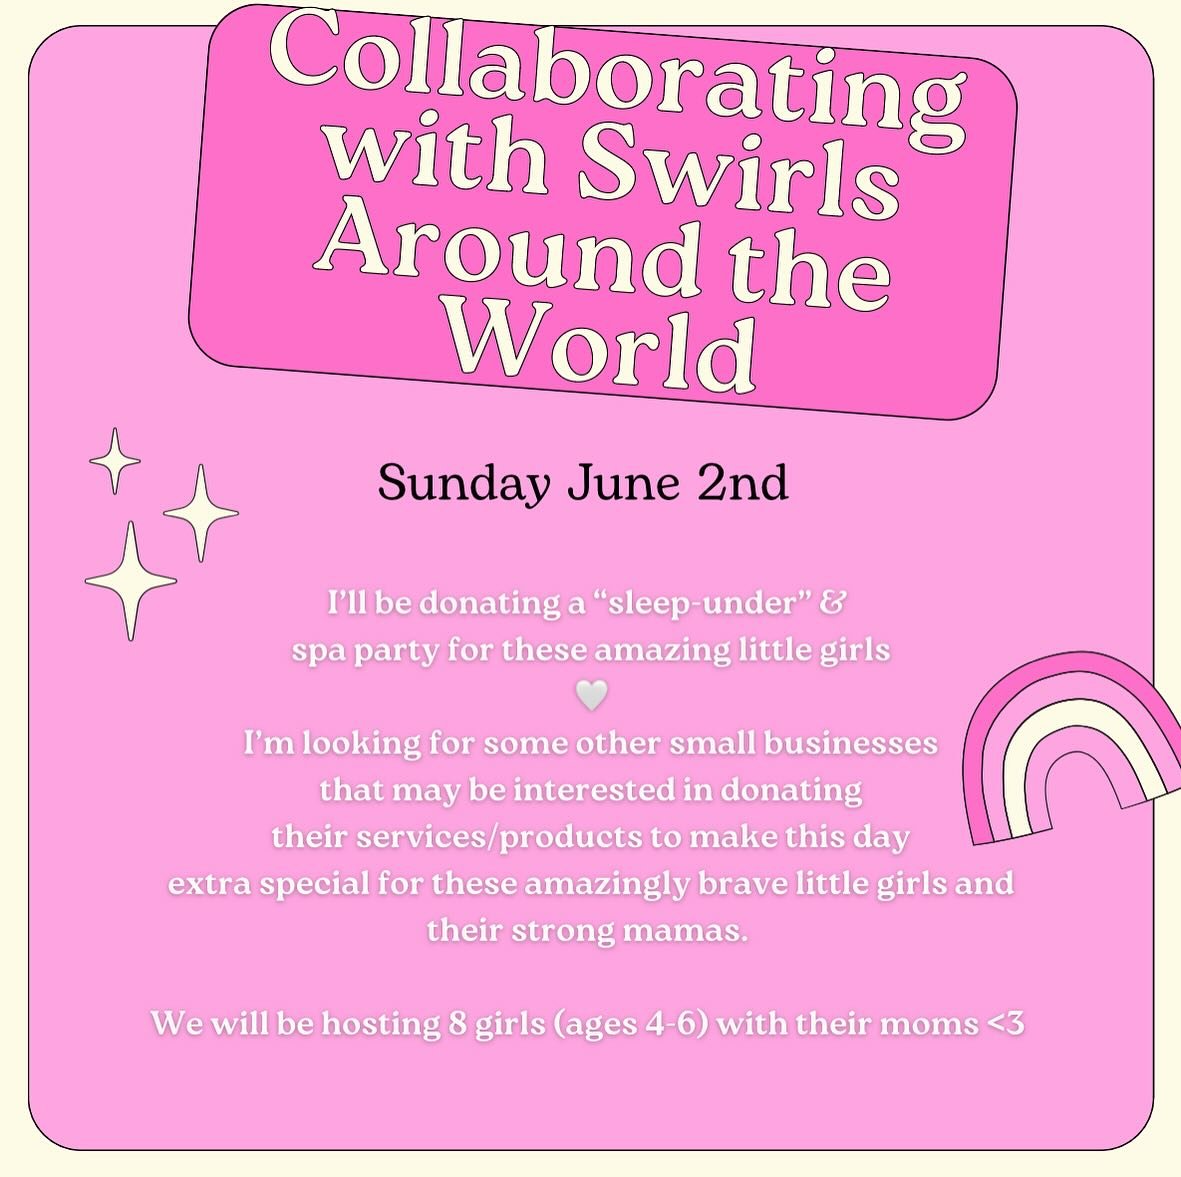 ✨Have you heard of @swirlsaroundtheworld and their Swirls Days?!✨

Jen is one of the absolute sweetest humans you will ever meet. She approached me to help host a Swirls Day for a group of 8 little girls ages 4-6. I can&rsquo;t even imagine the stren